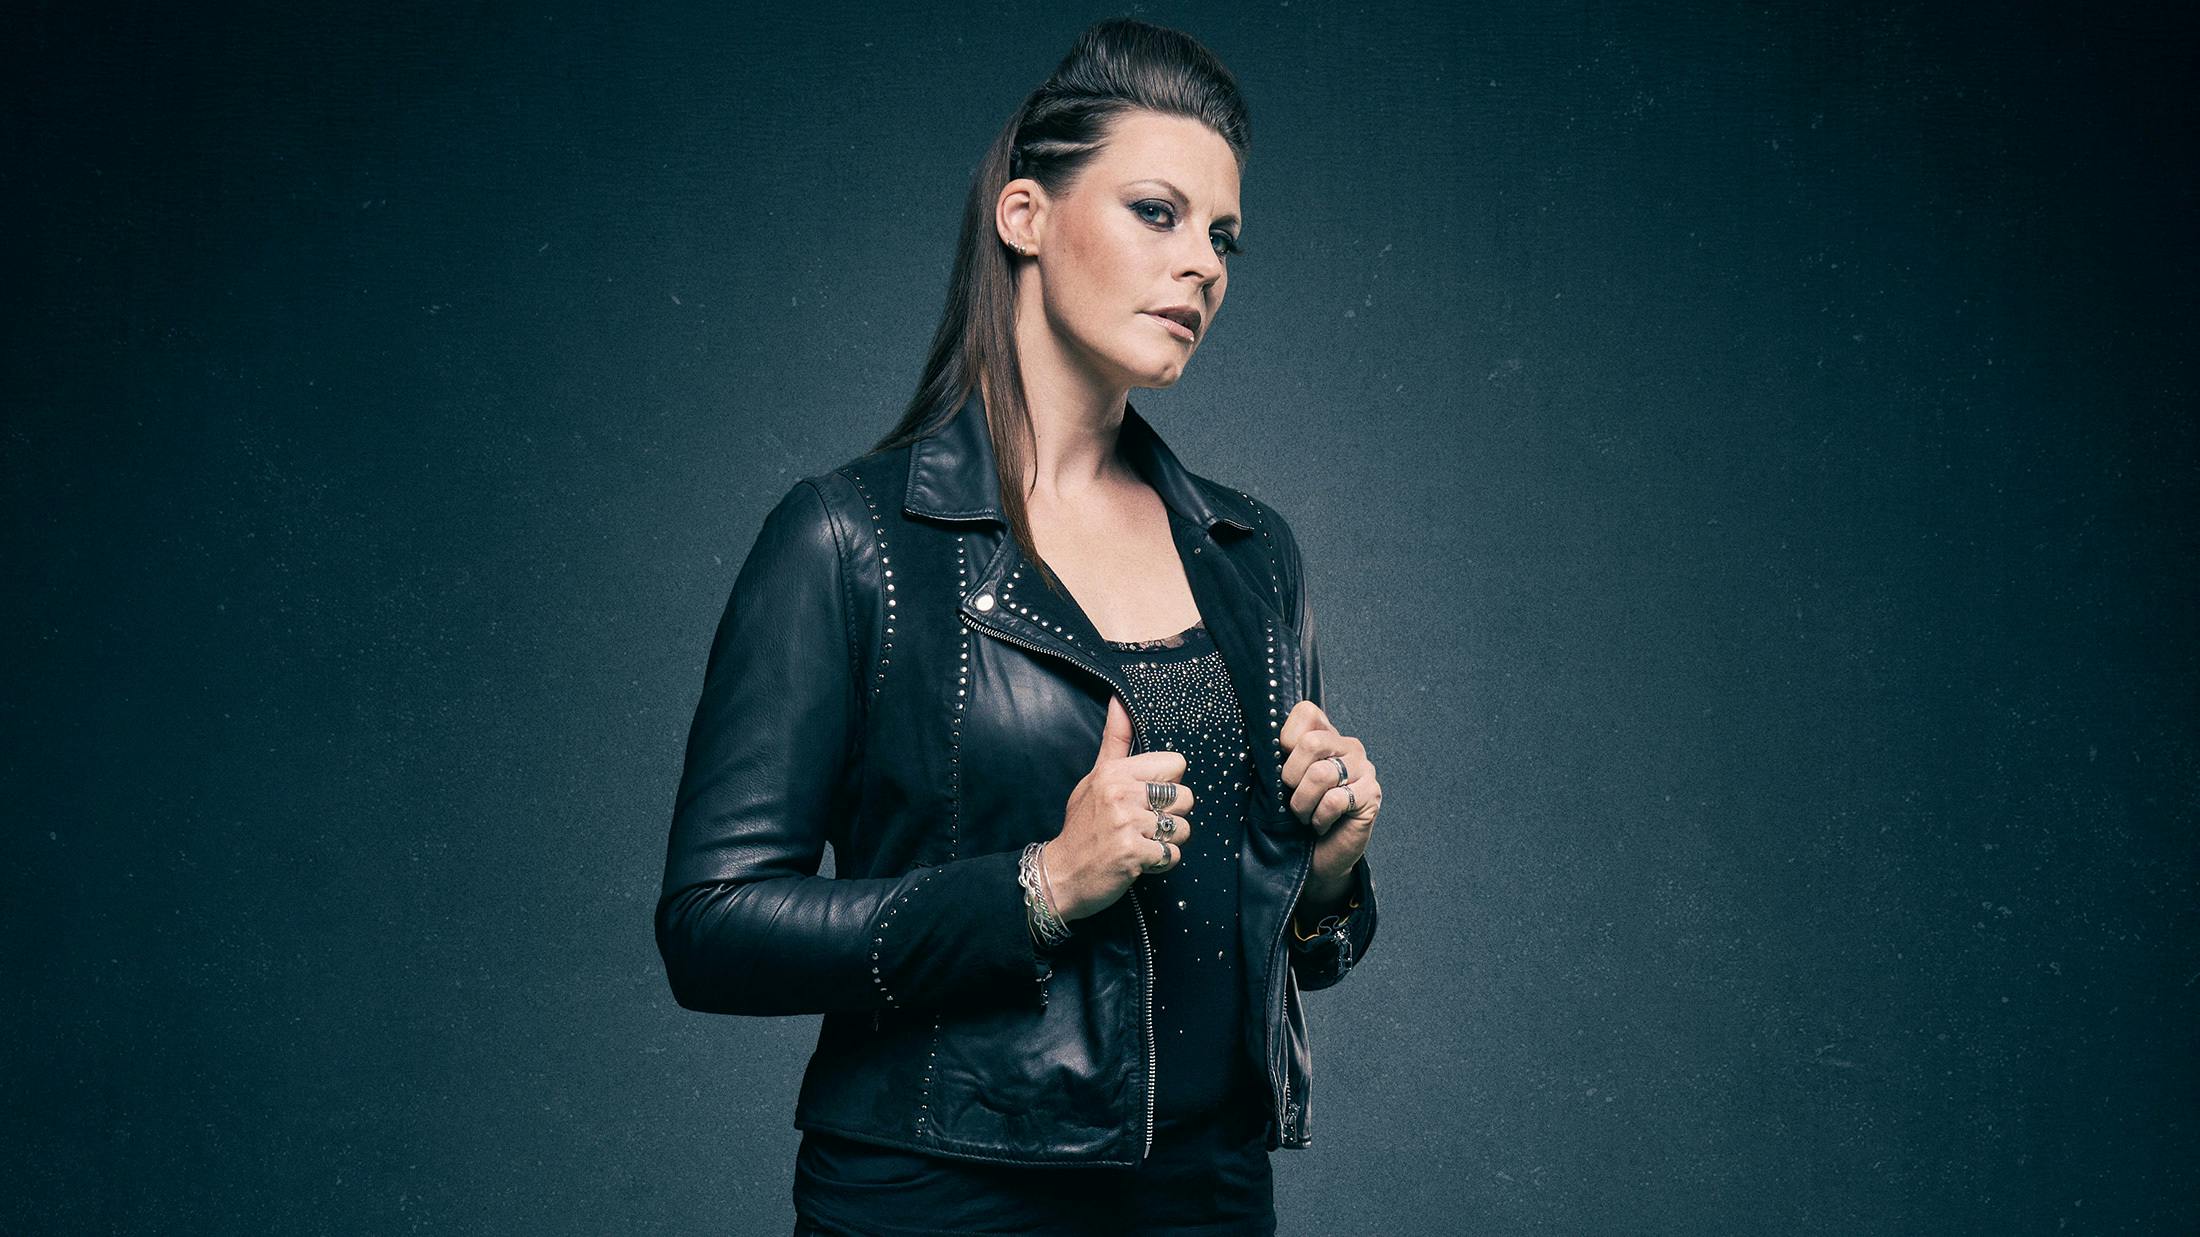 7 Things You Probably Didn't Know About Nightwish's Floor Jansen